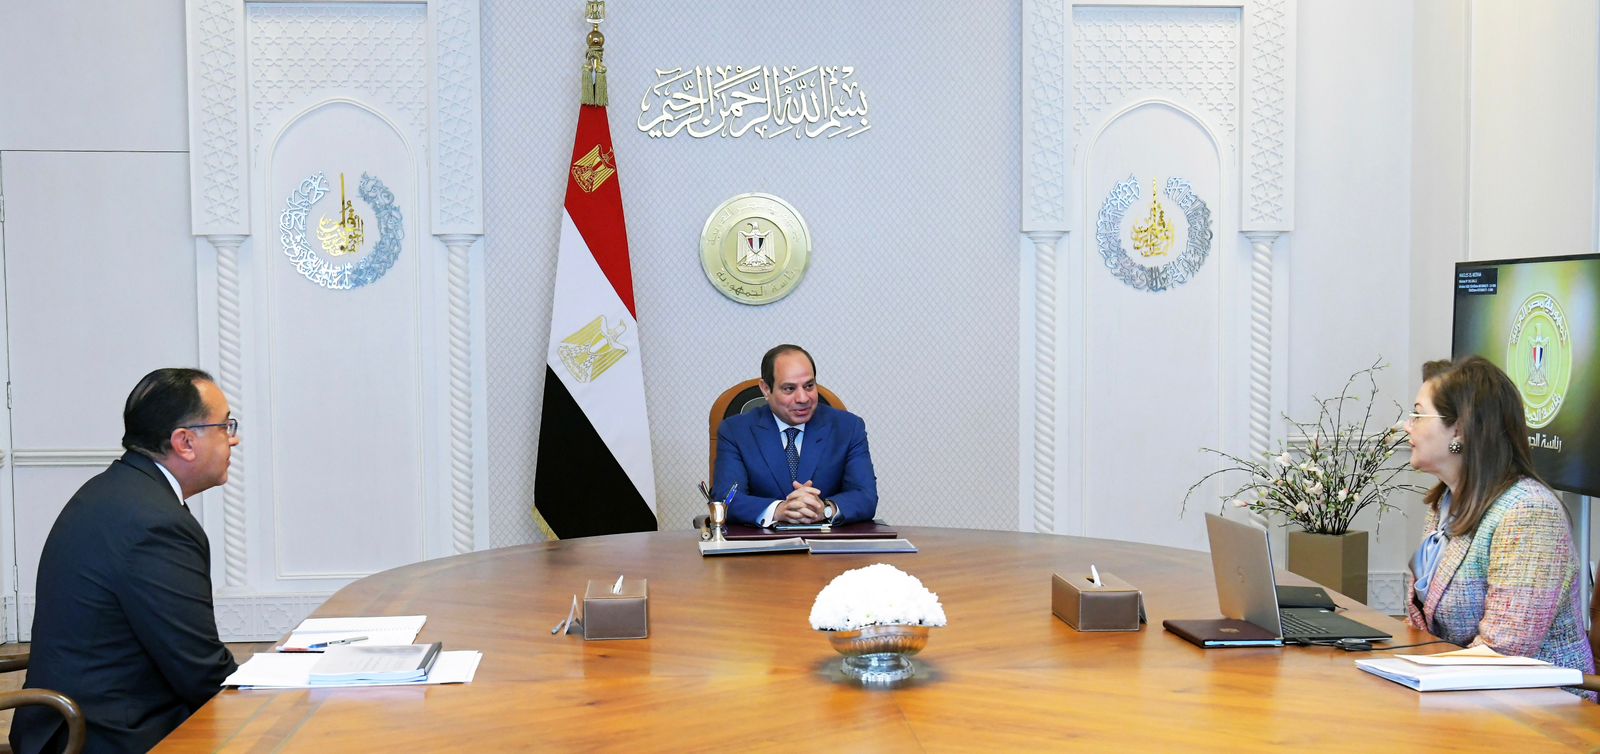 President Sisi directs the continuation of efforts aimed at expanding investment in Egyptian human resources